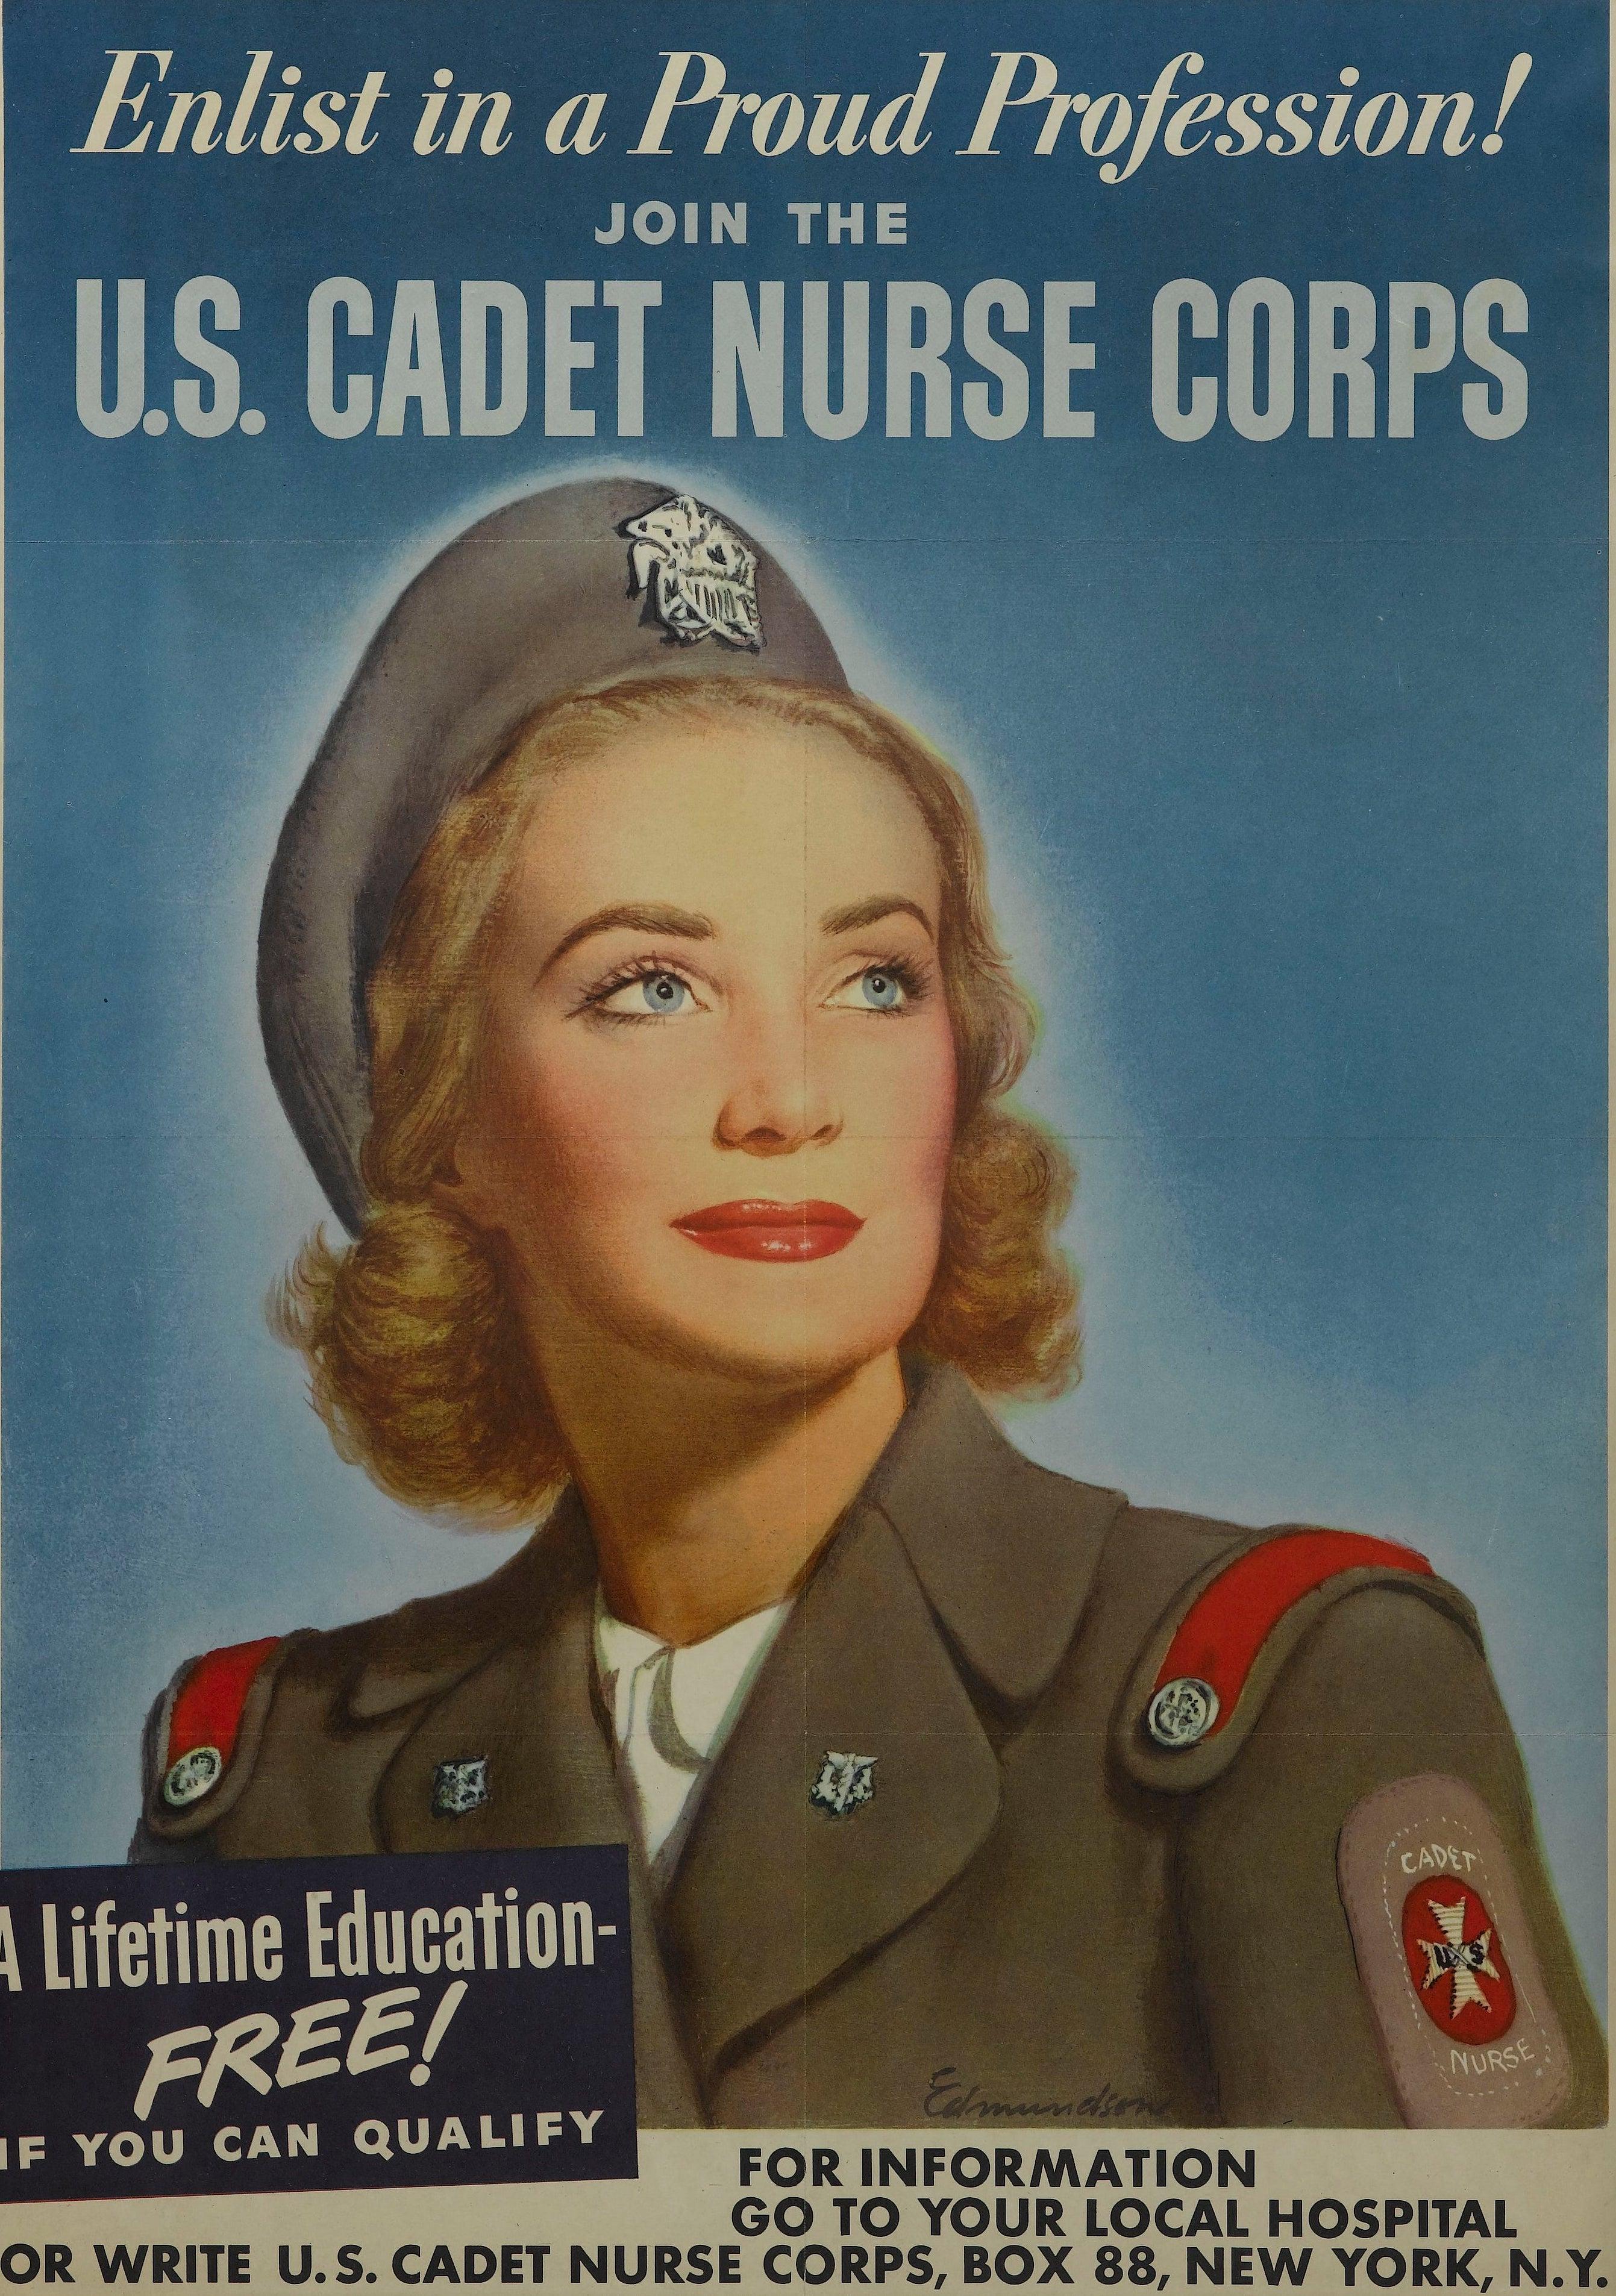 „Enlist in a Proud Profession. Join the U.S. Cadet Nurse Corps.